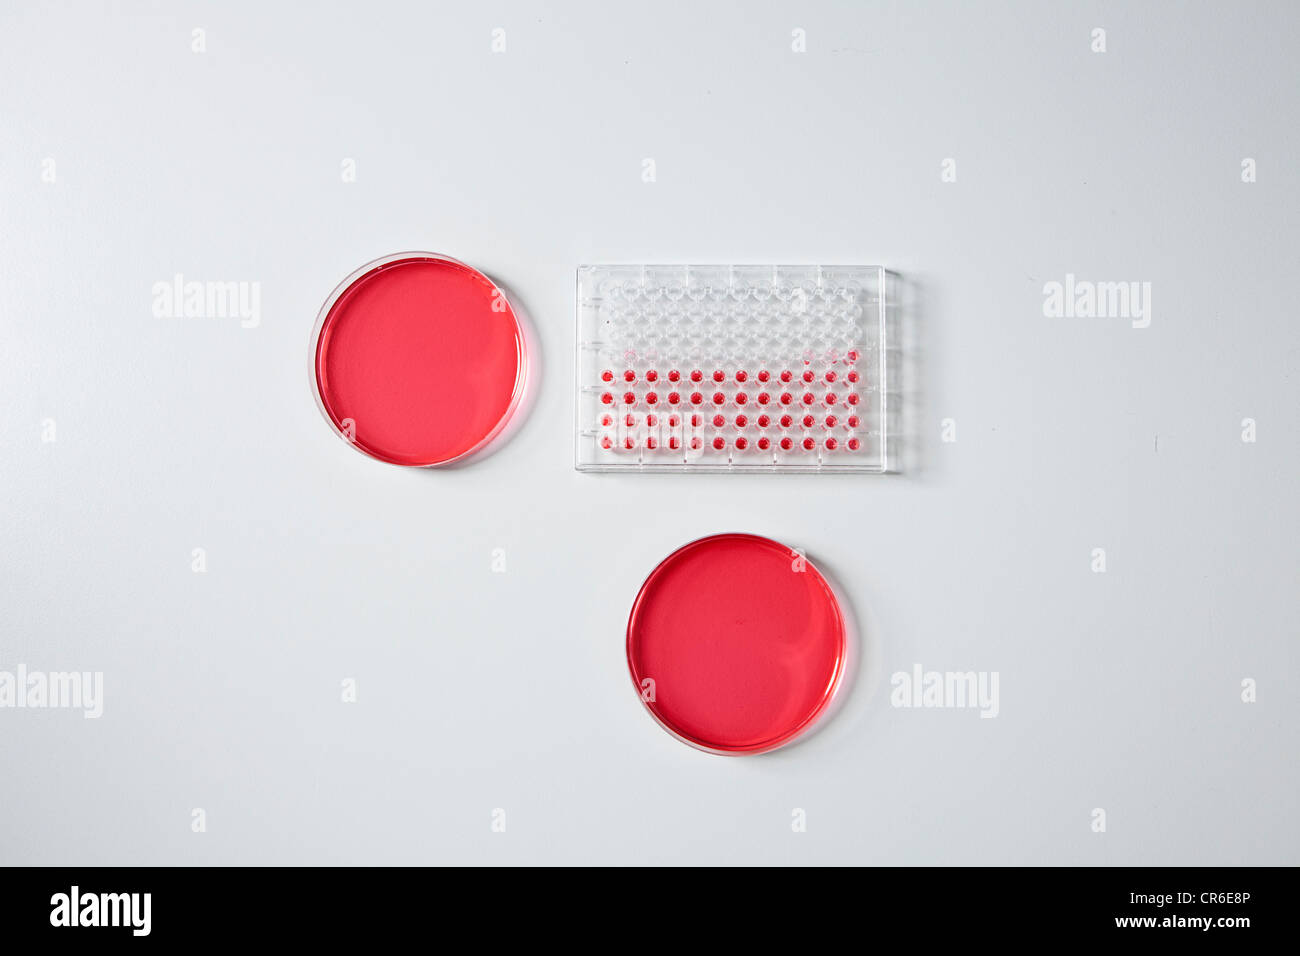 Germany, Bavaria, Munich, Test tray and petri dishes for medical research in laboratory Stock Photo